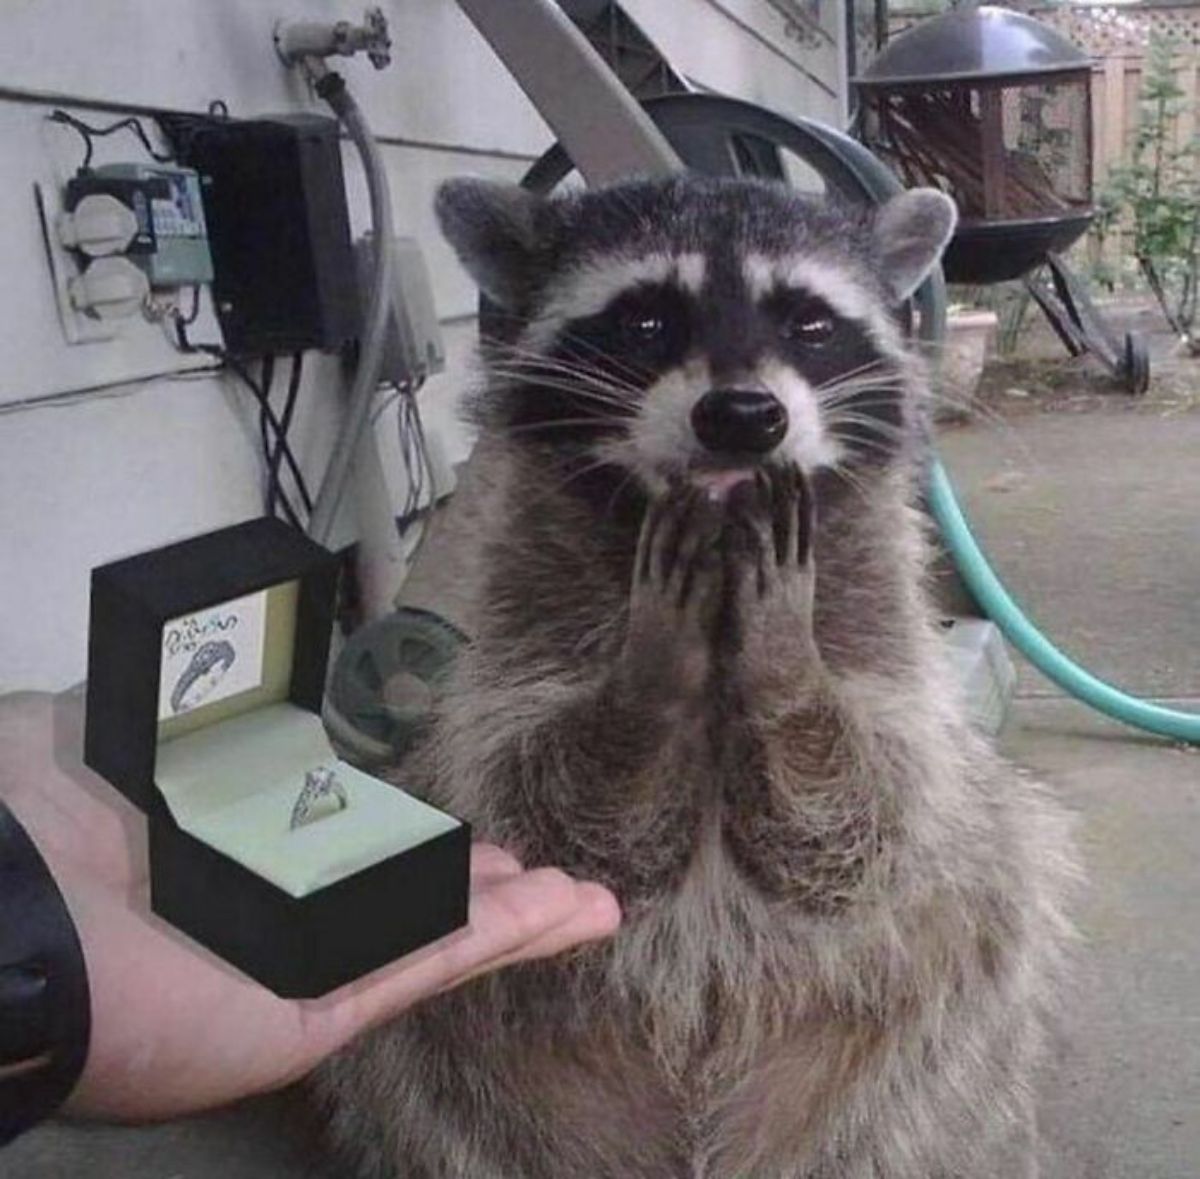 raccoon with front paws at its mouth with someone holding out an engagement ring in a black box to it